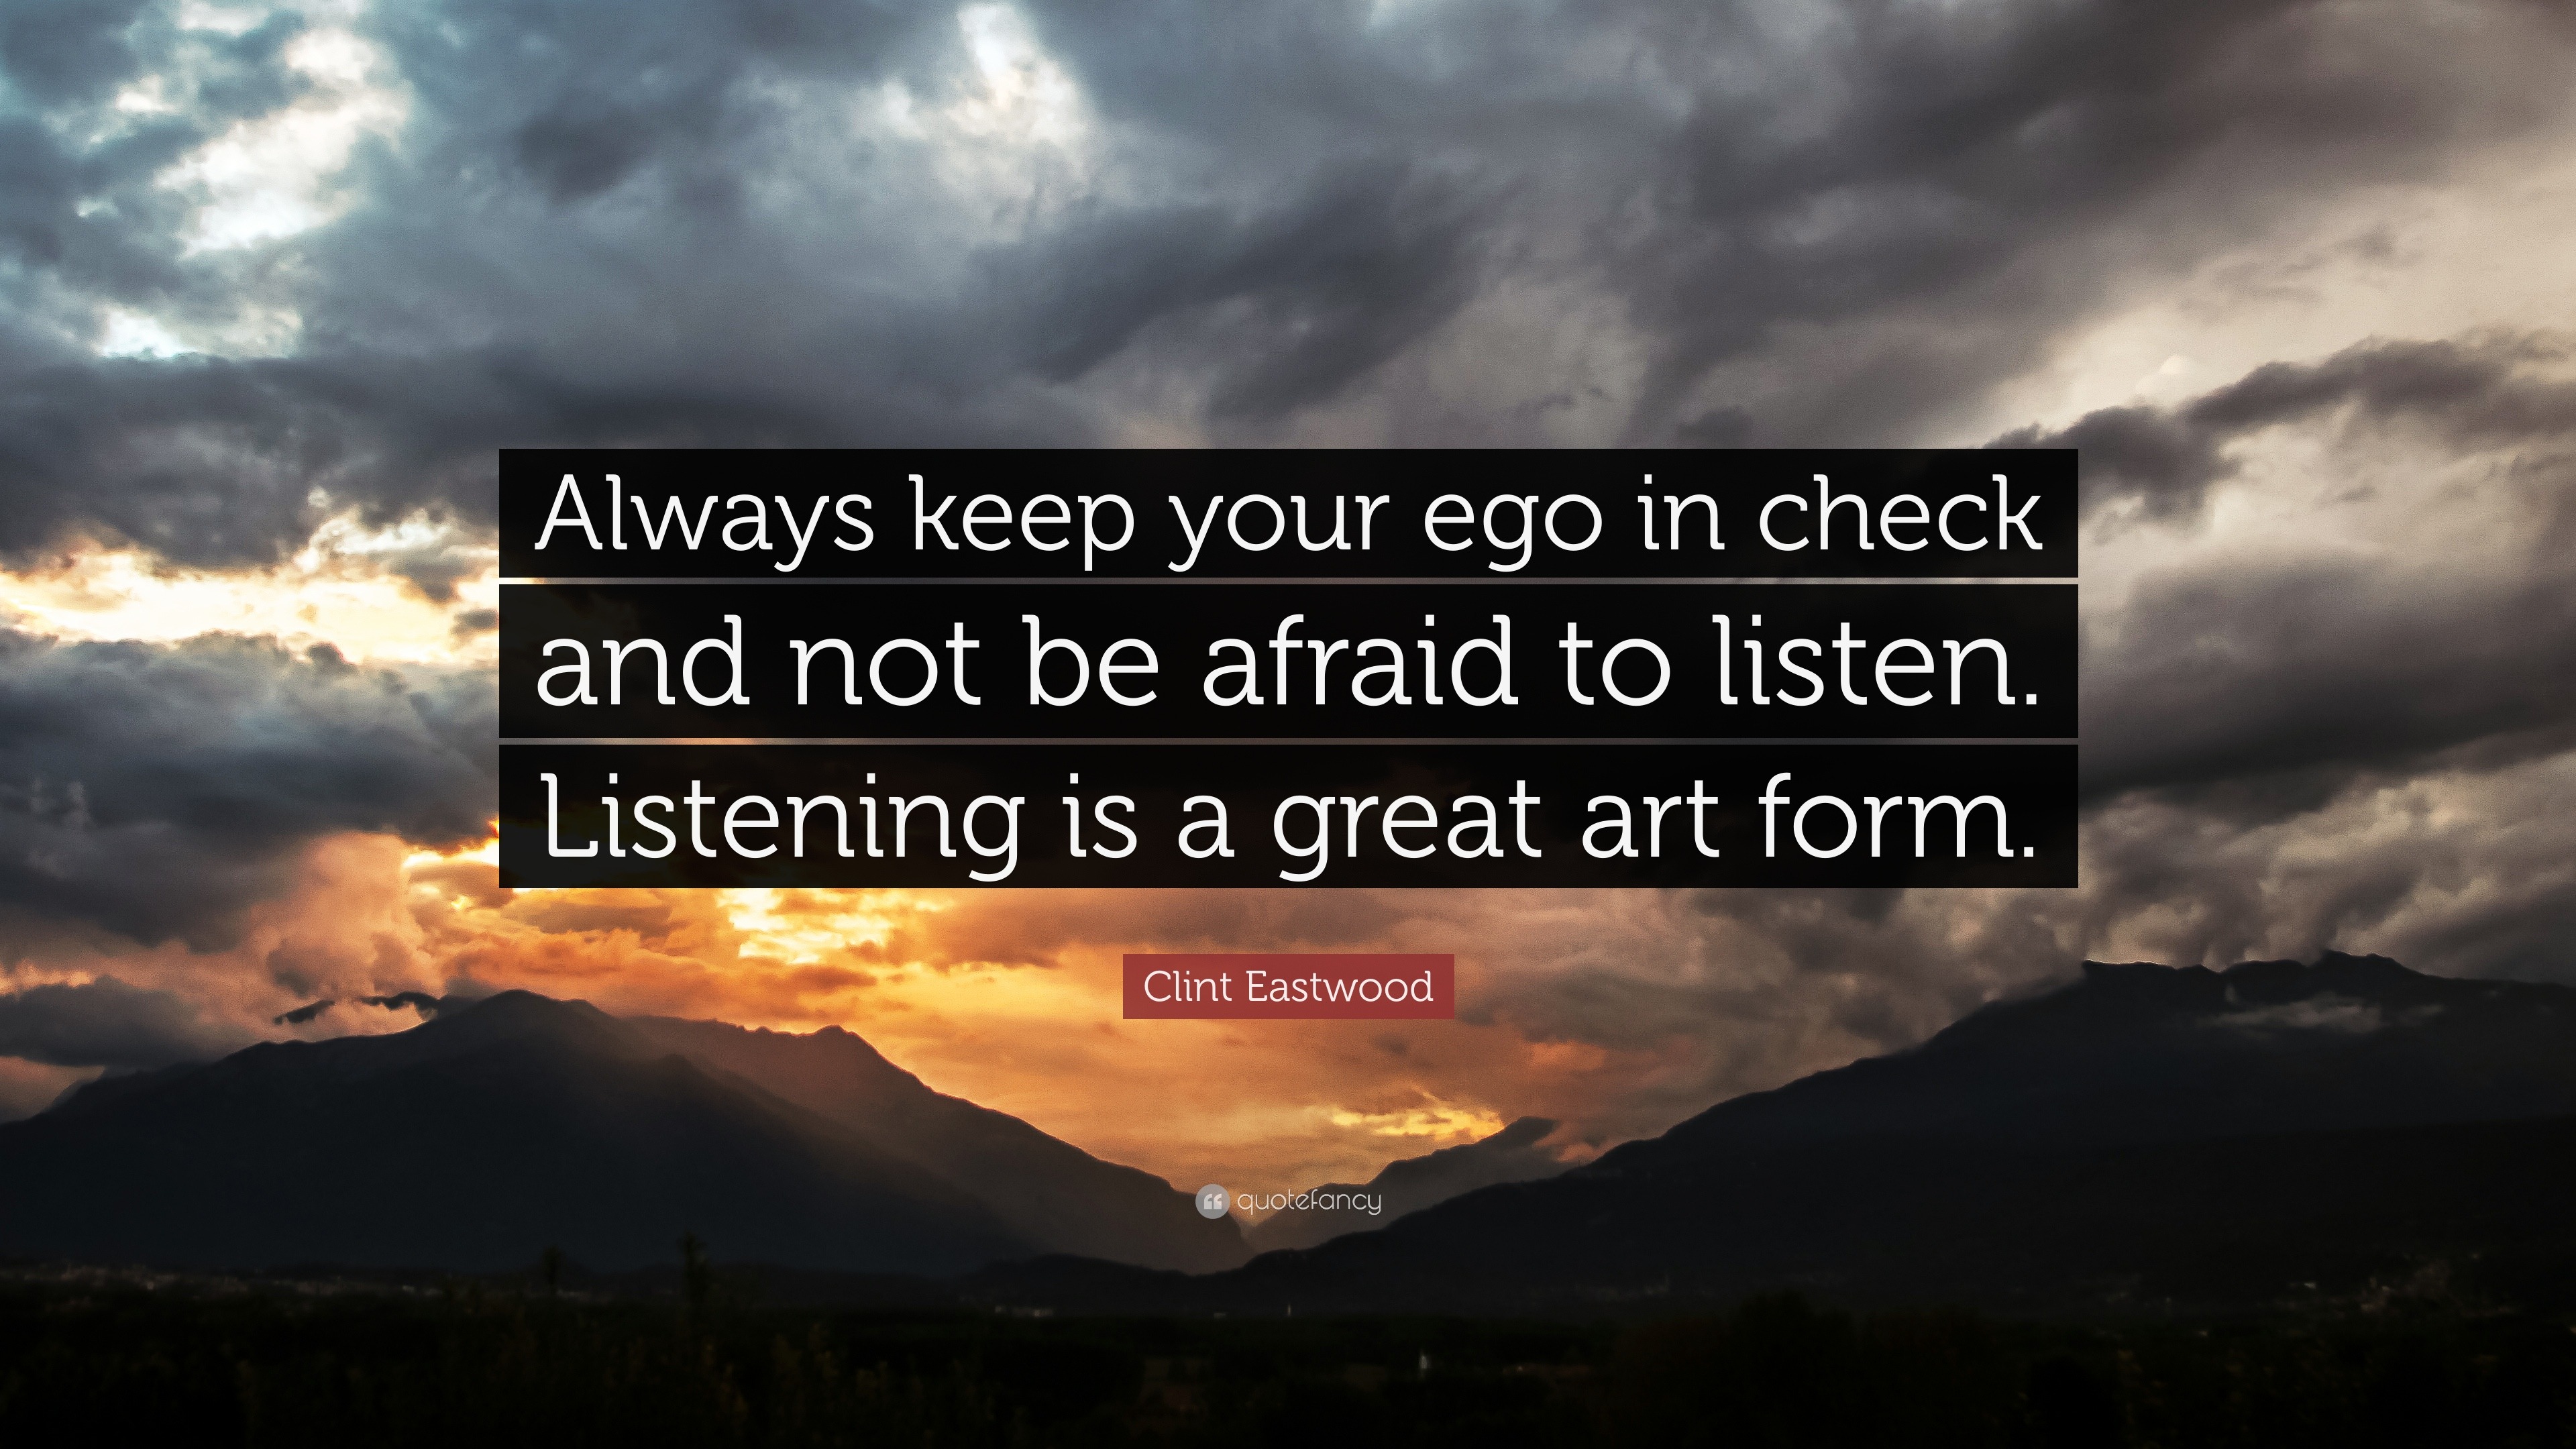 Ego Quotes (40 Wallpapers) - Quotefancy